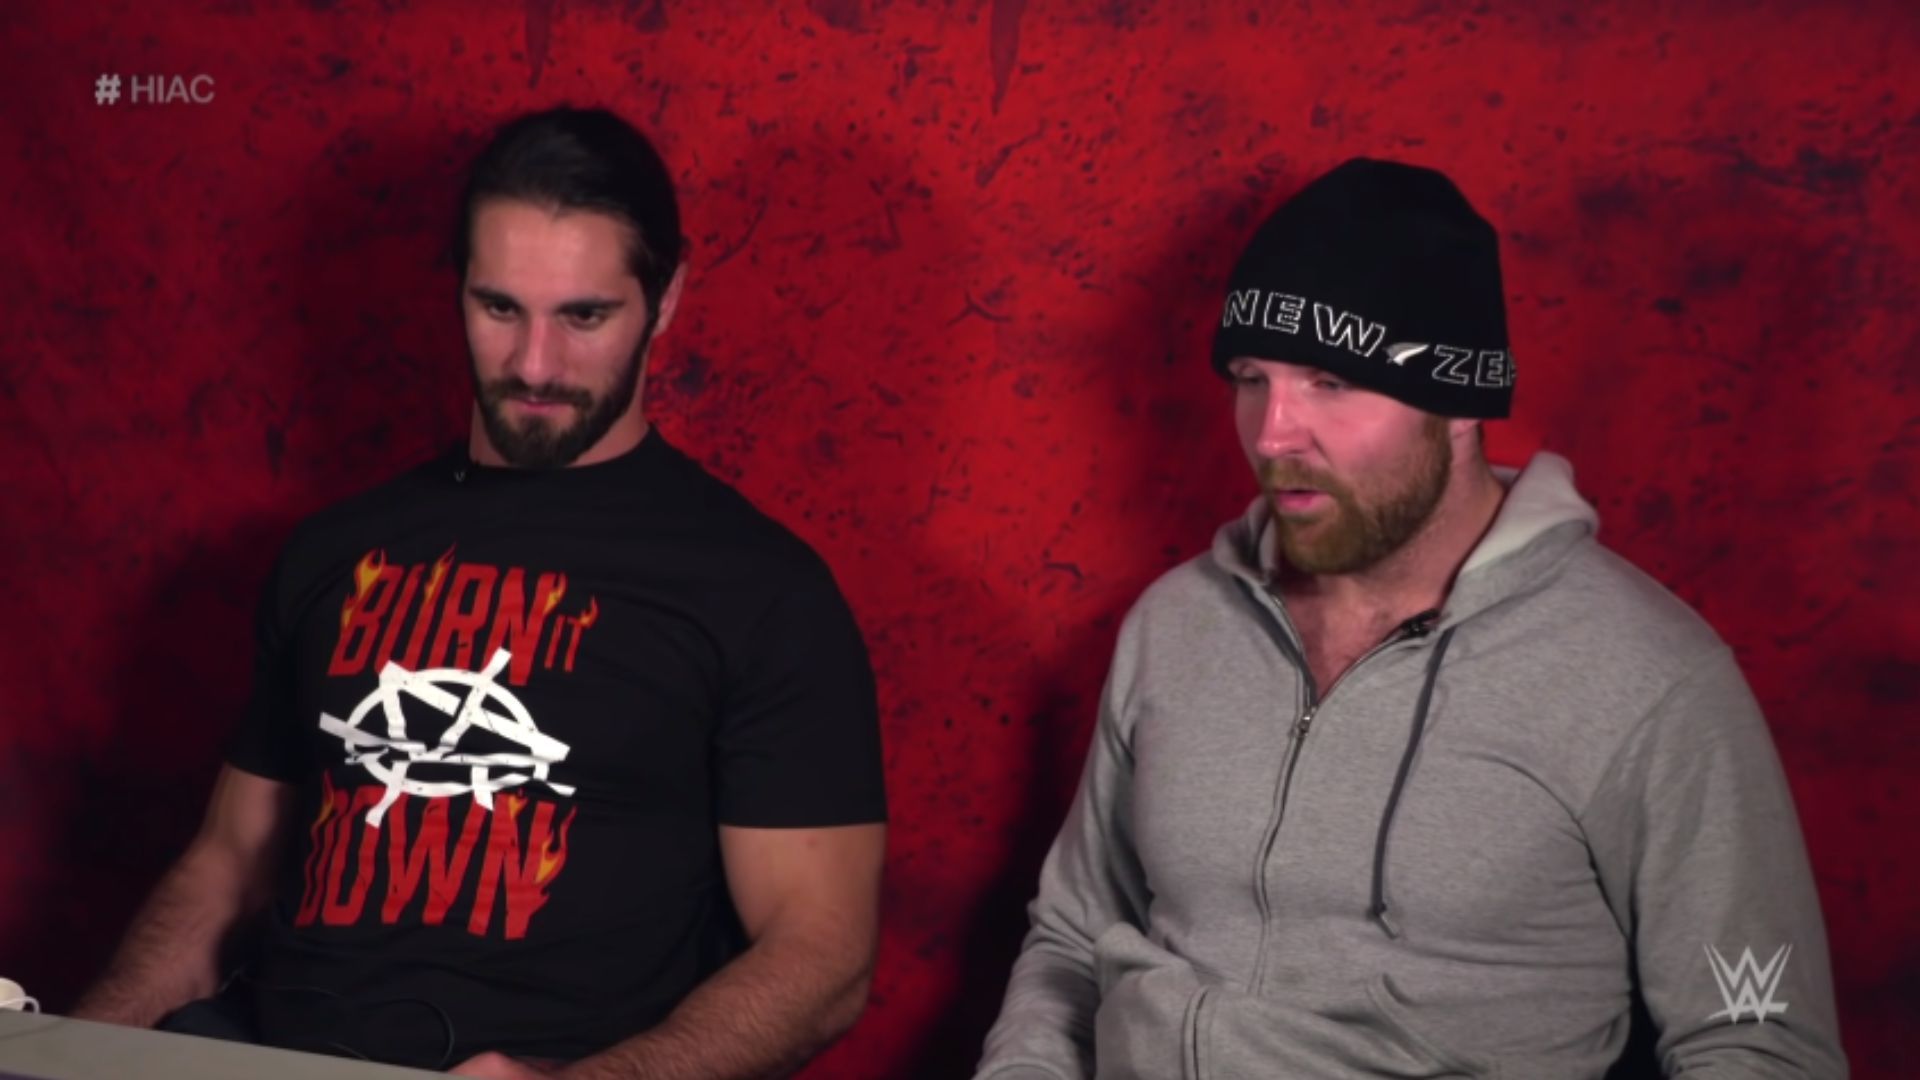 Seth Rollins (left) and Jon Moxley (right)